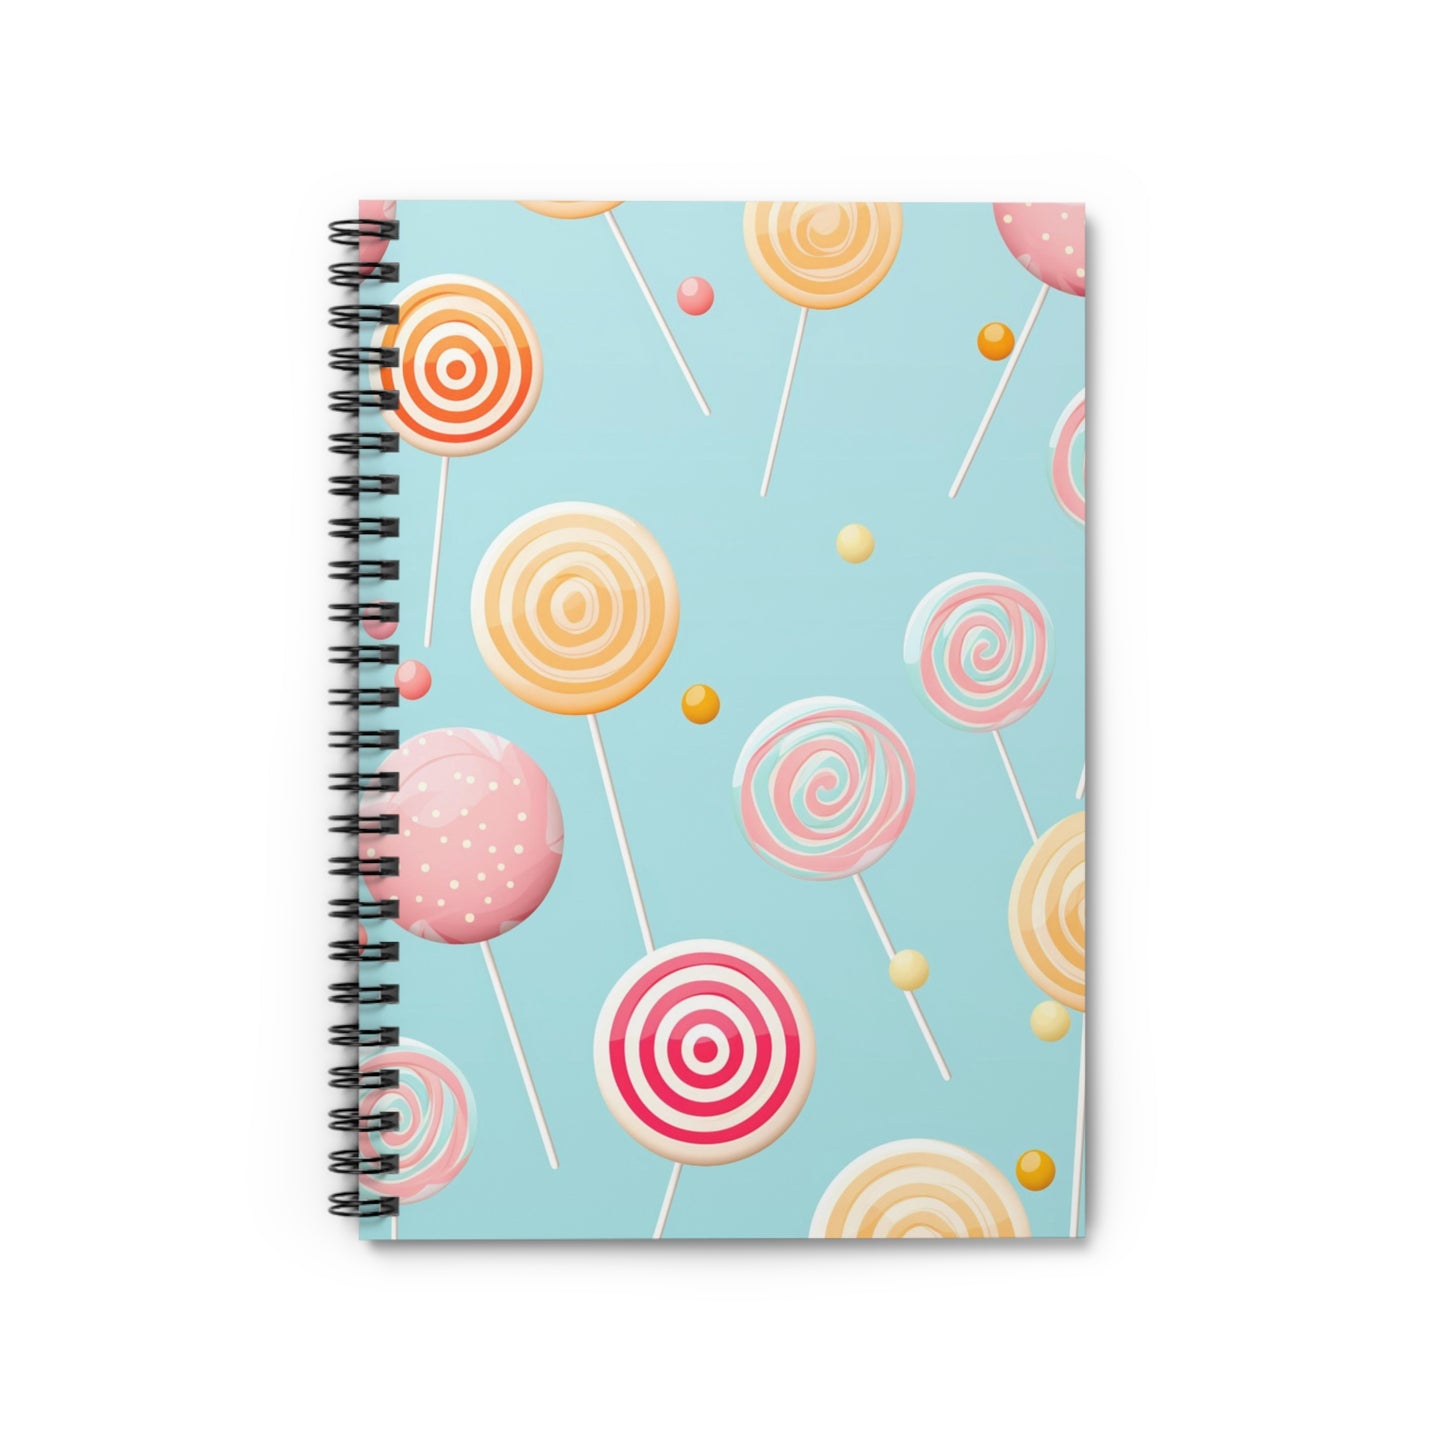 Lollipop Spiral Bound Notebook, Pastel Candy Travel Pattern Design Small Journal Notepad Ruled Line Book Paper Pad Work Aesthetic Starcove Fashion